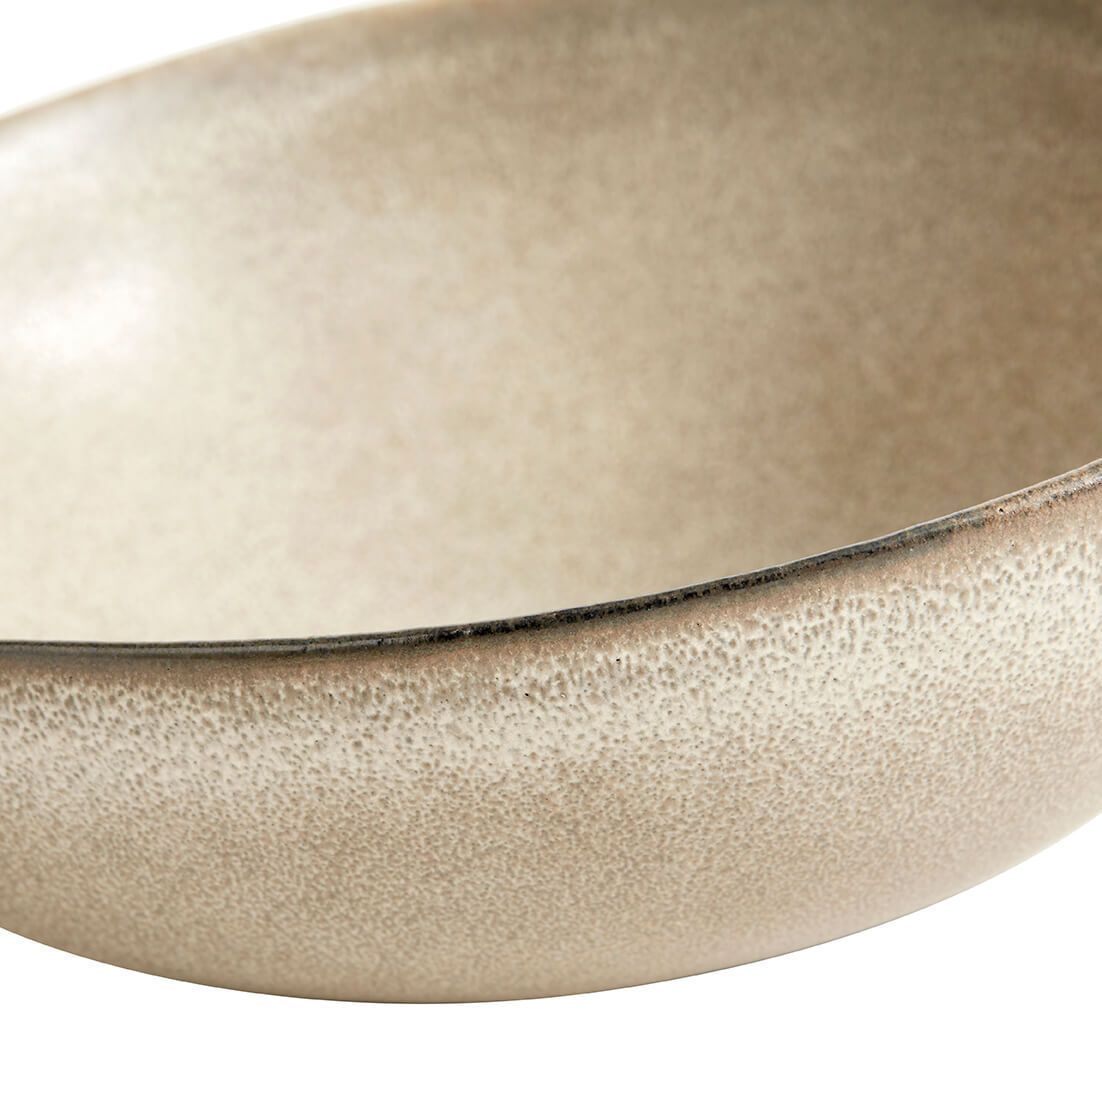 Muubs Mame Muesli Bowl Oyster, 14,5cm